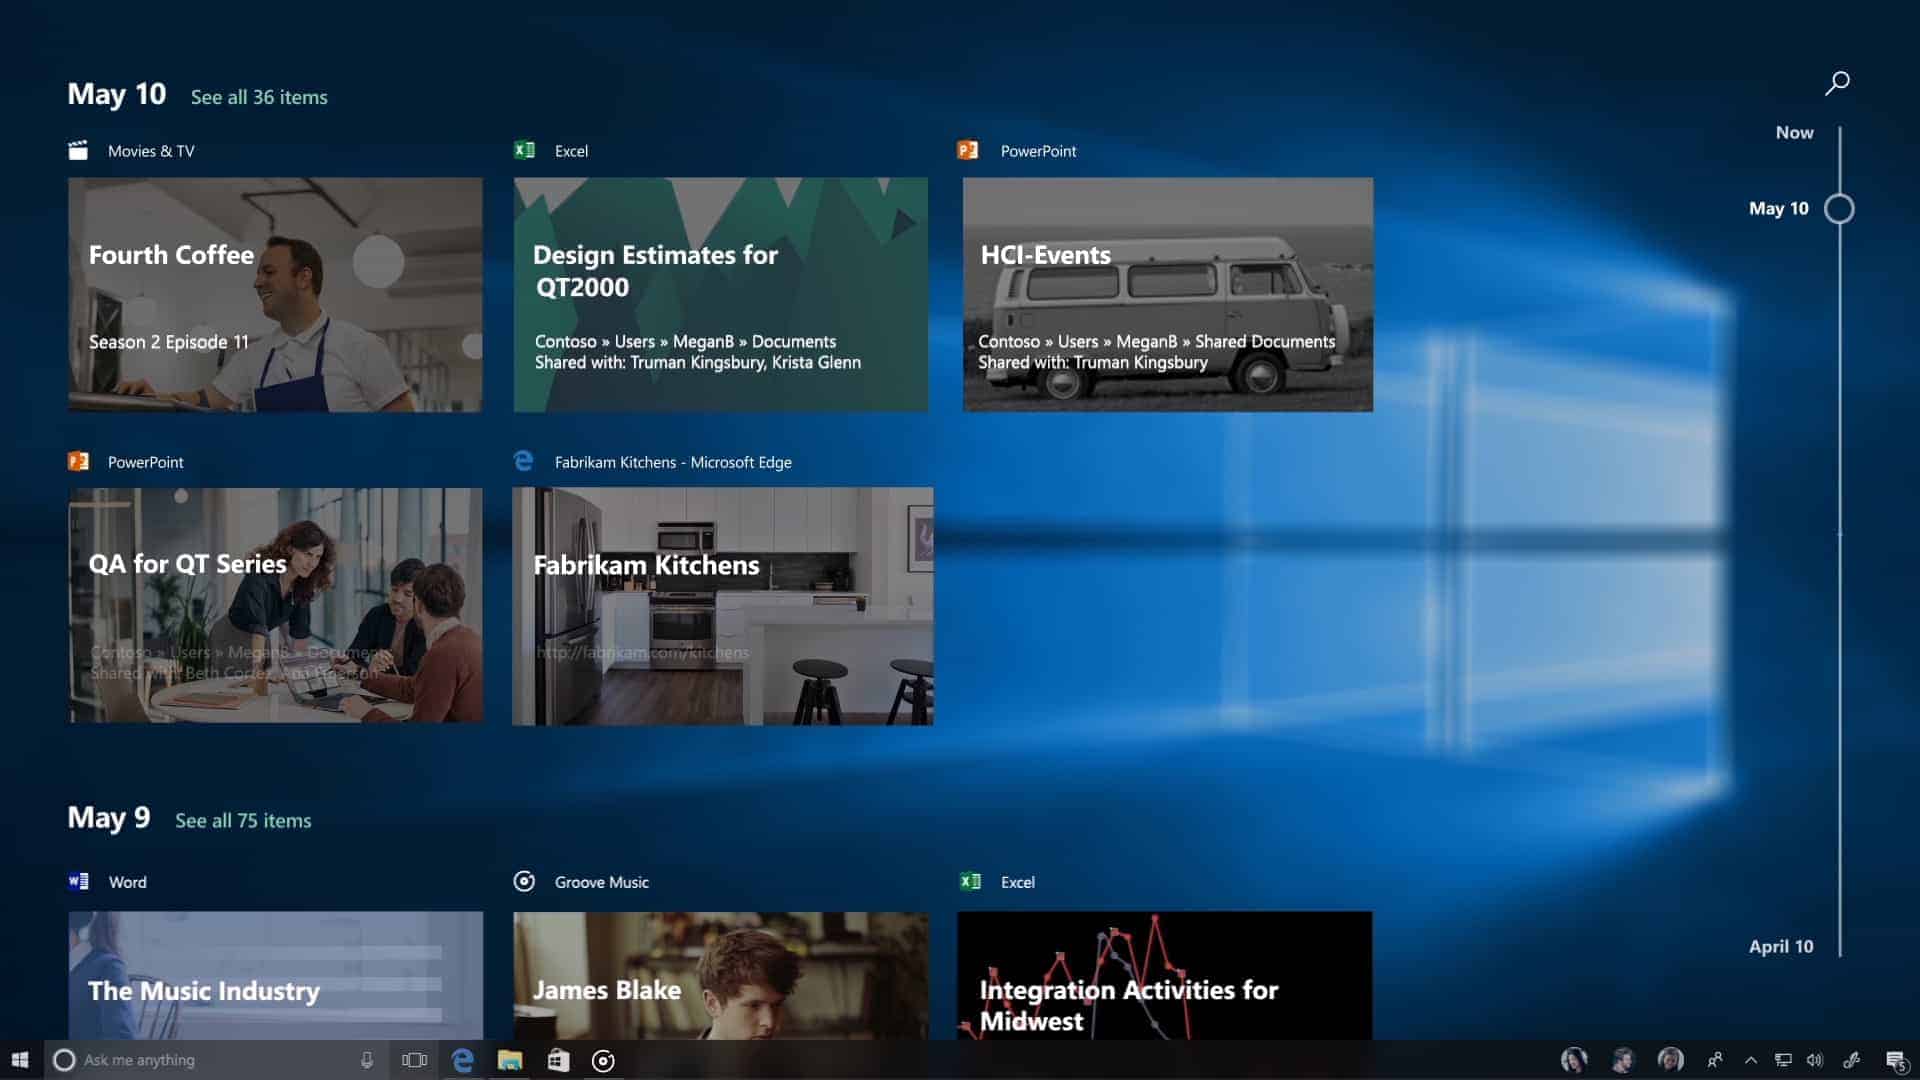 How to use Windows 10 Timeline feature